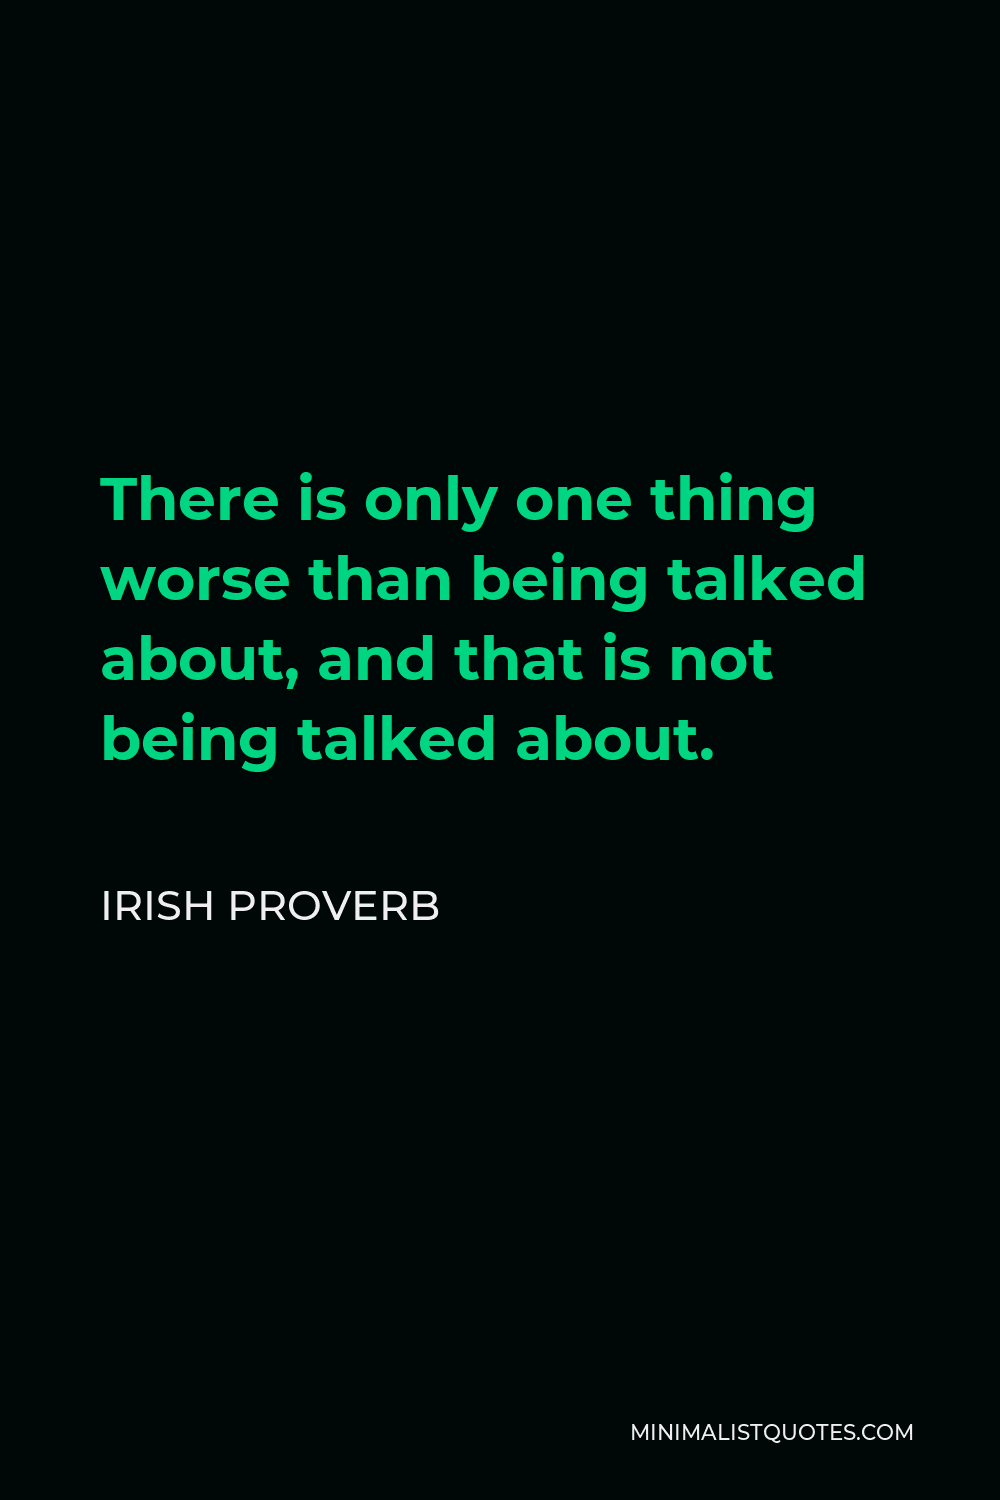 Irish Proverb Quote - There is only one thing worse than being talked about, and that is not being talked about.